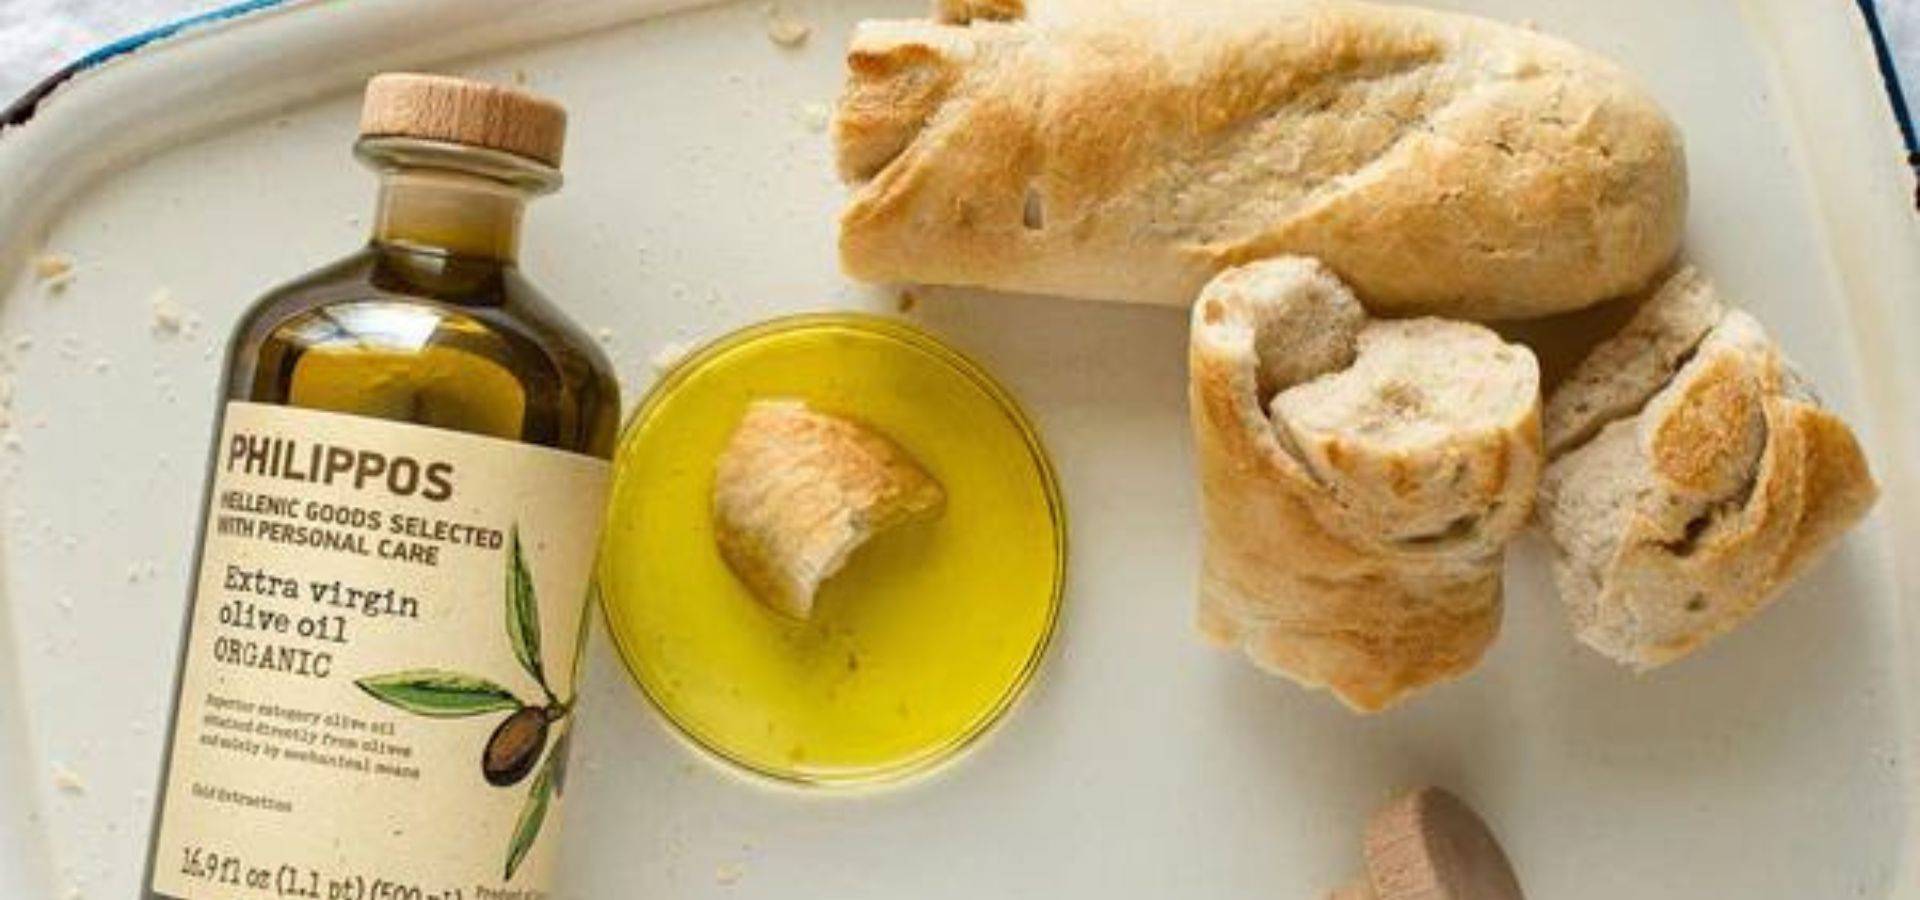 PHilippos Olive Oil from Zelos